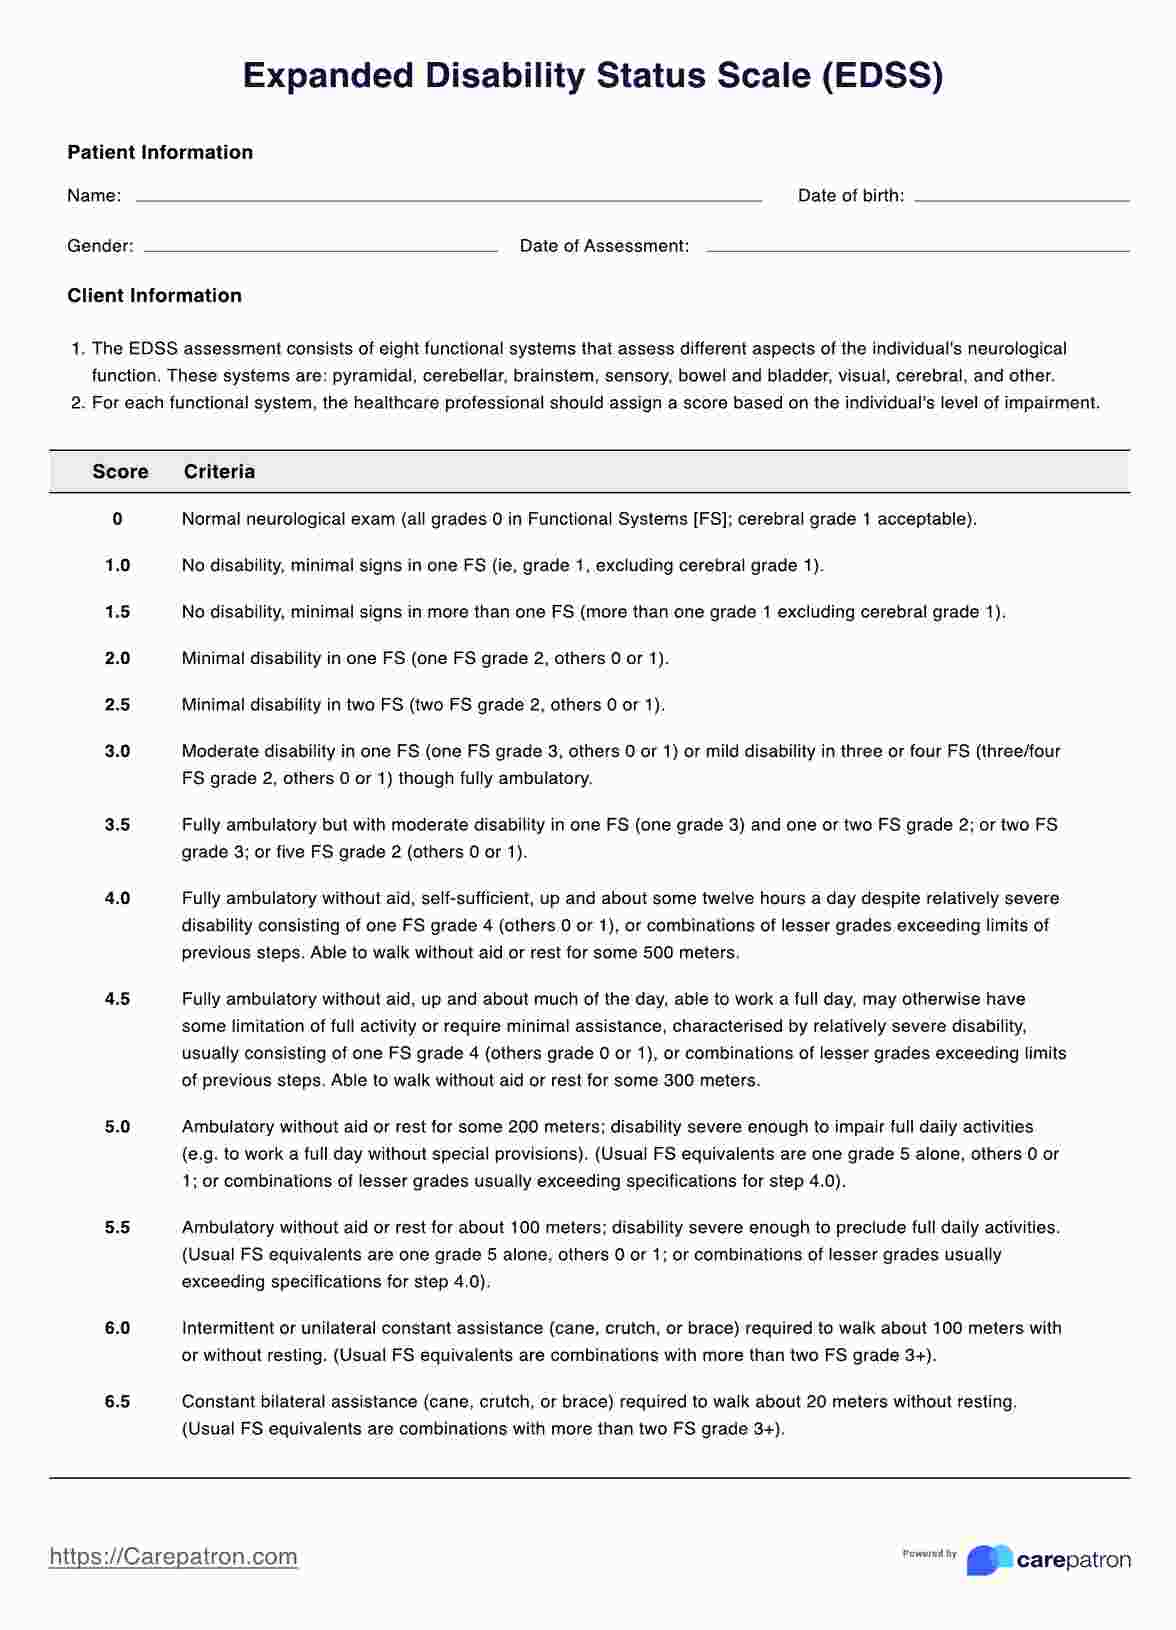 Expanded Disability Status Scale (EDSS) PDF Example